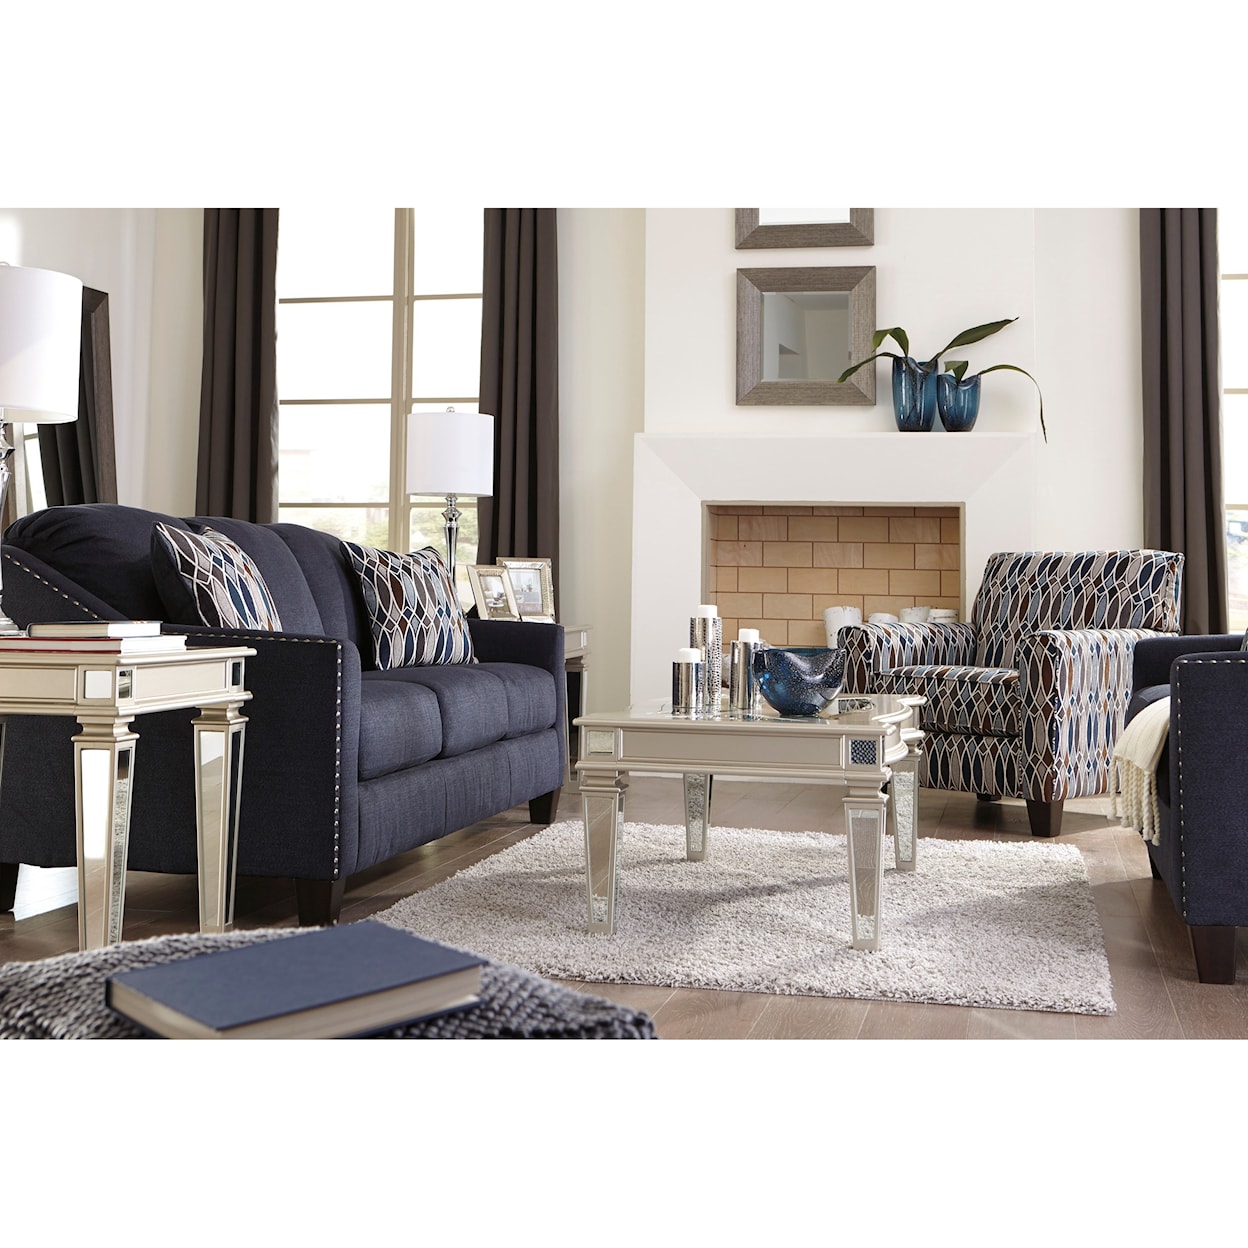 Benchcraft by Ashley Creeal Heights Sofa